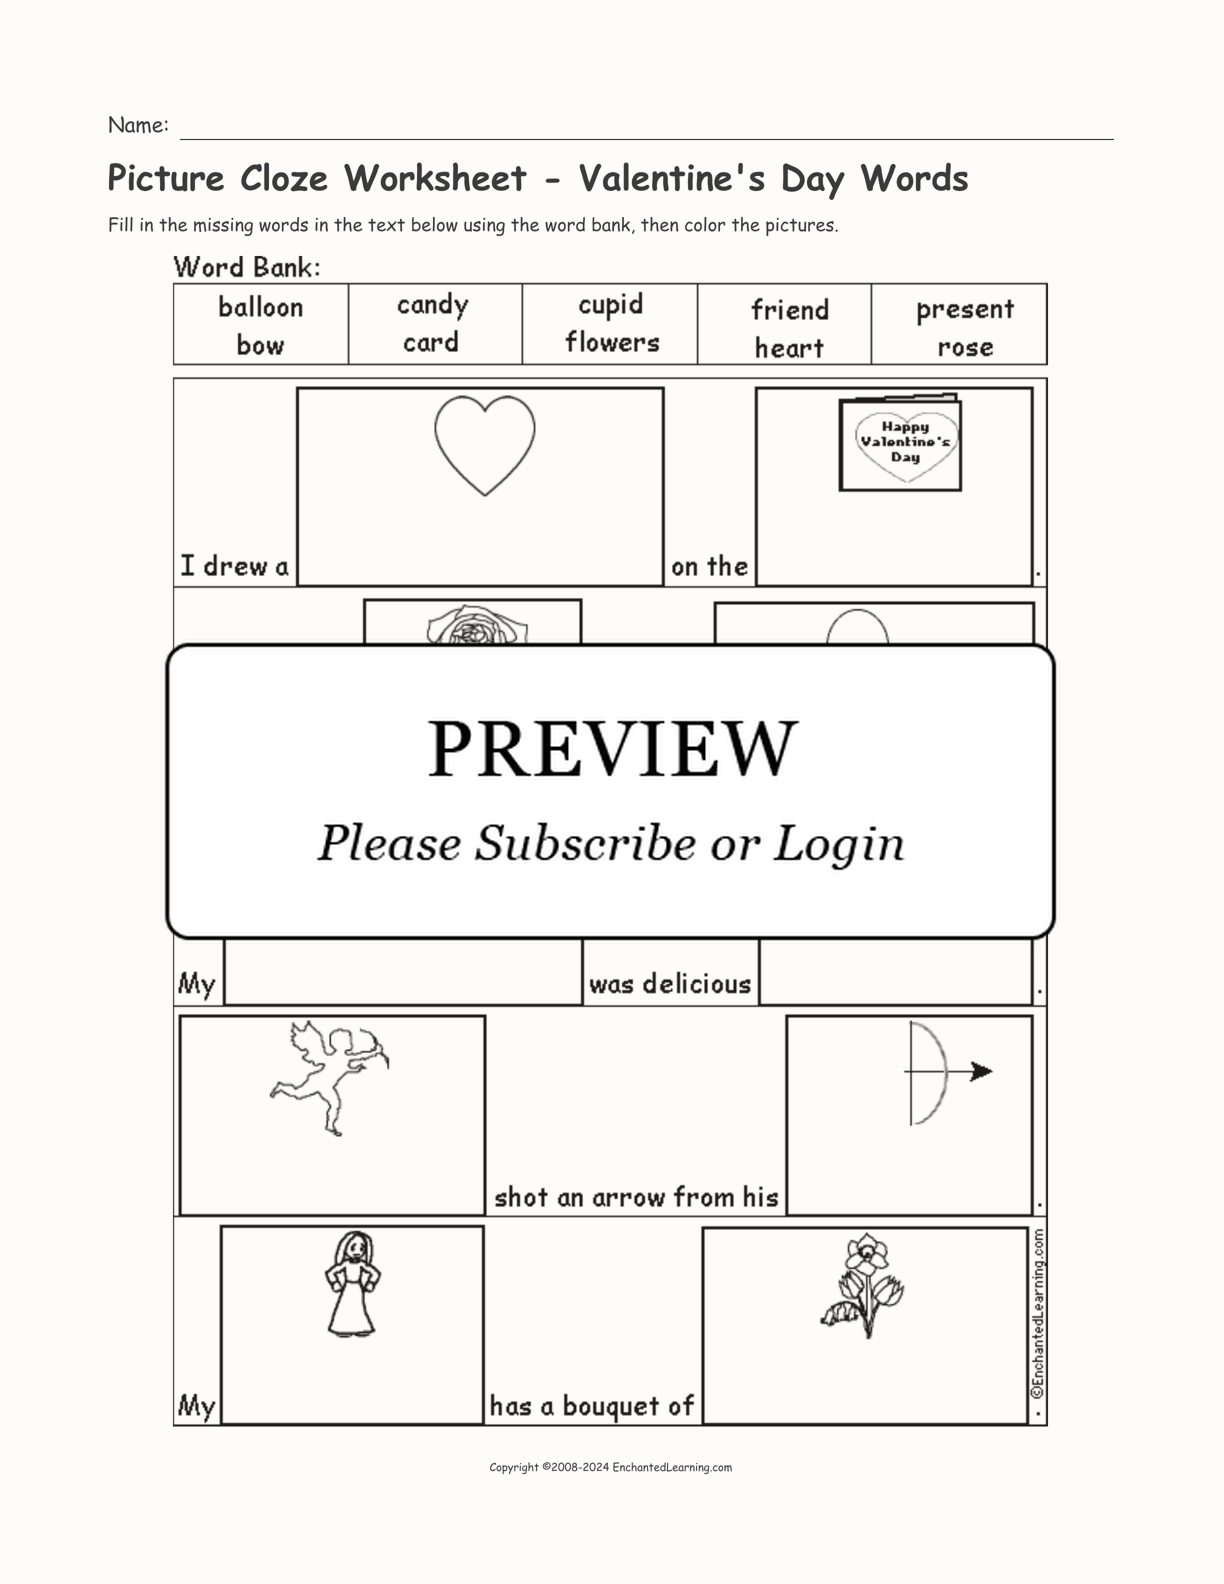 Picture Cloze Worksheet Valentine s Day Words Enchanted Learning